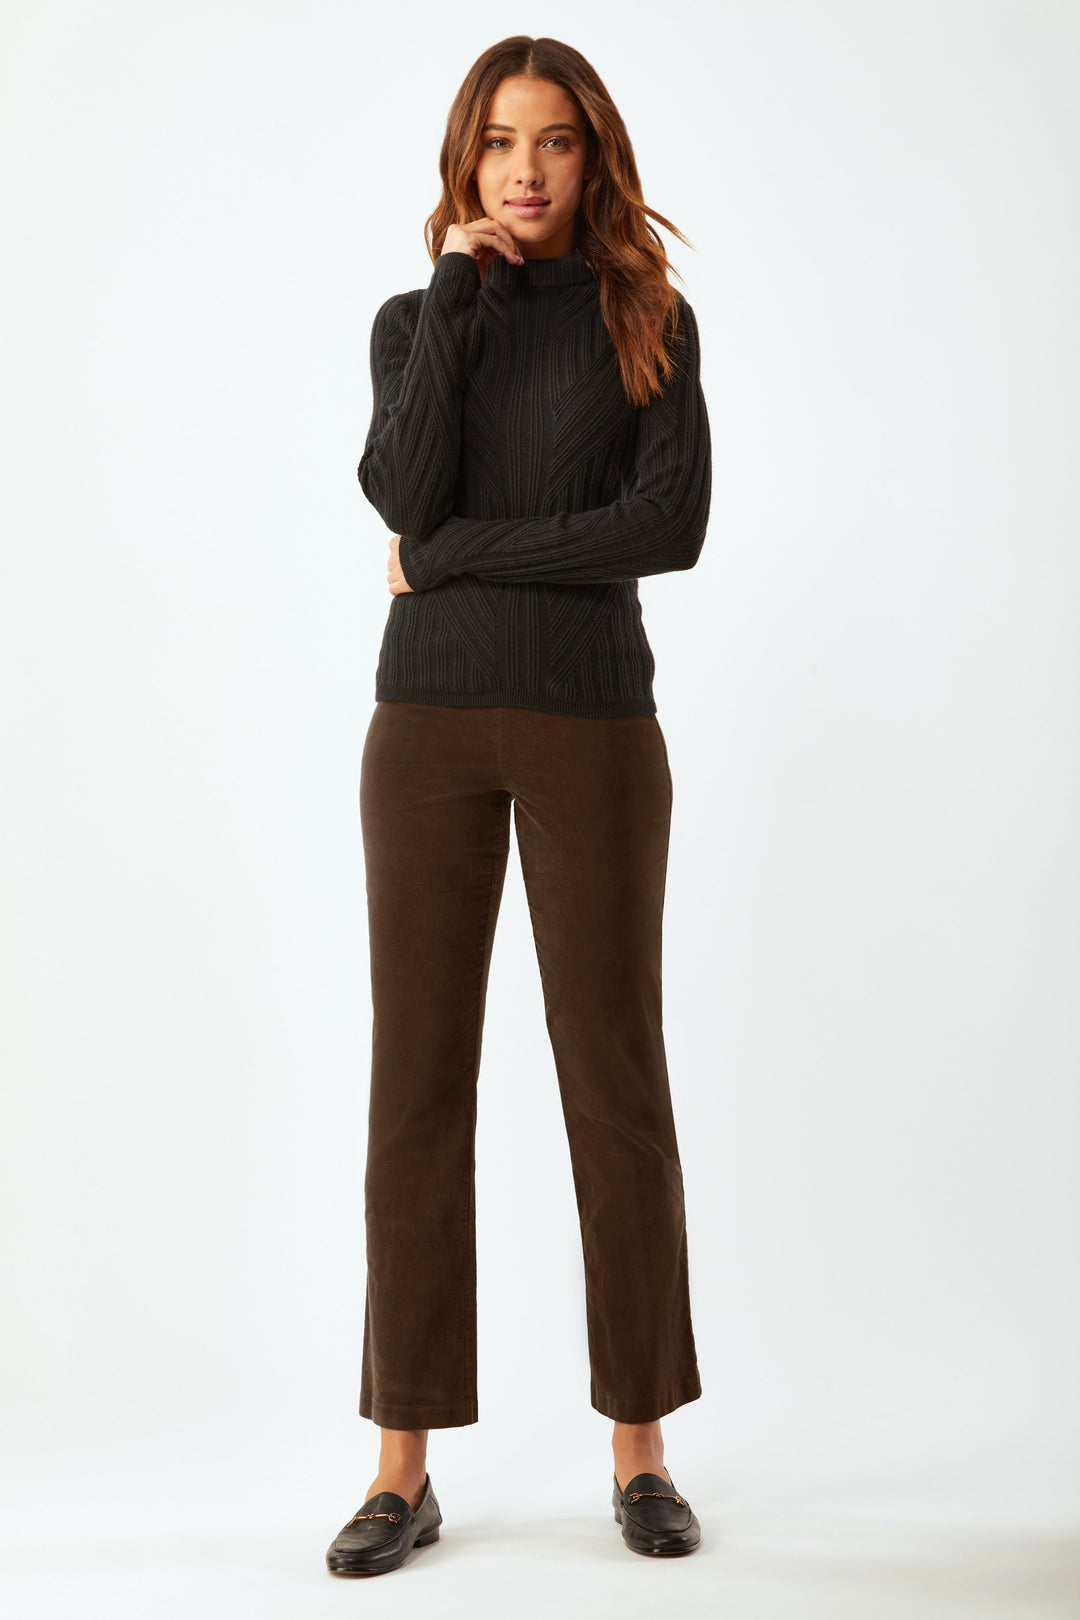 Prince Cropped Flare Pant in Corduroy - Chocolate